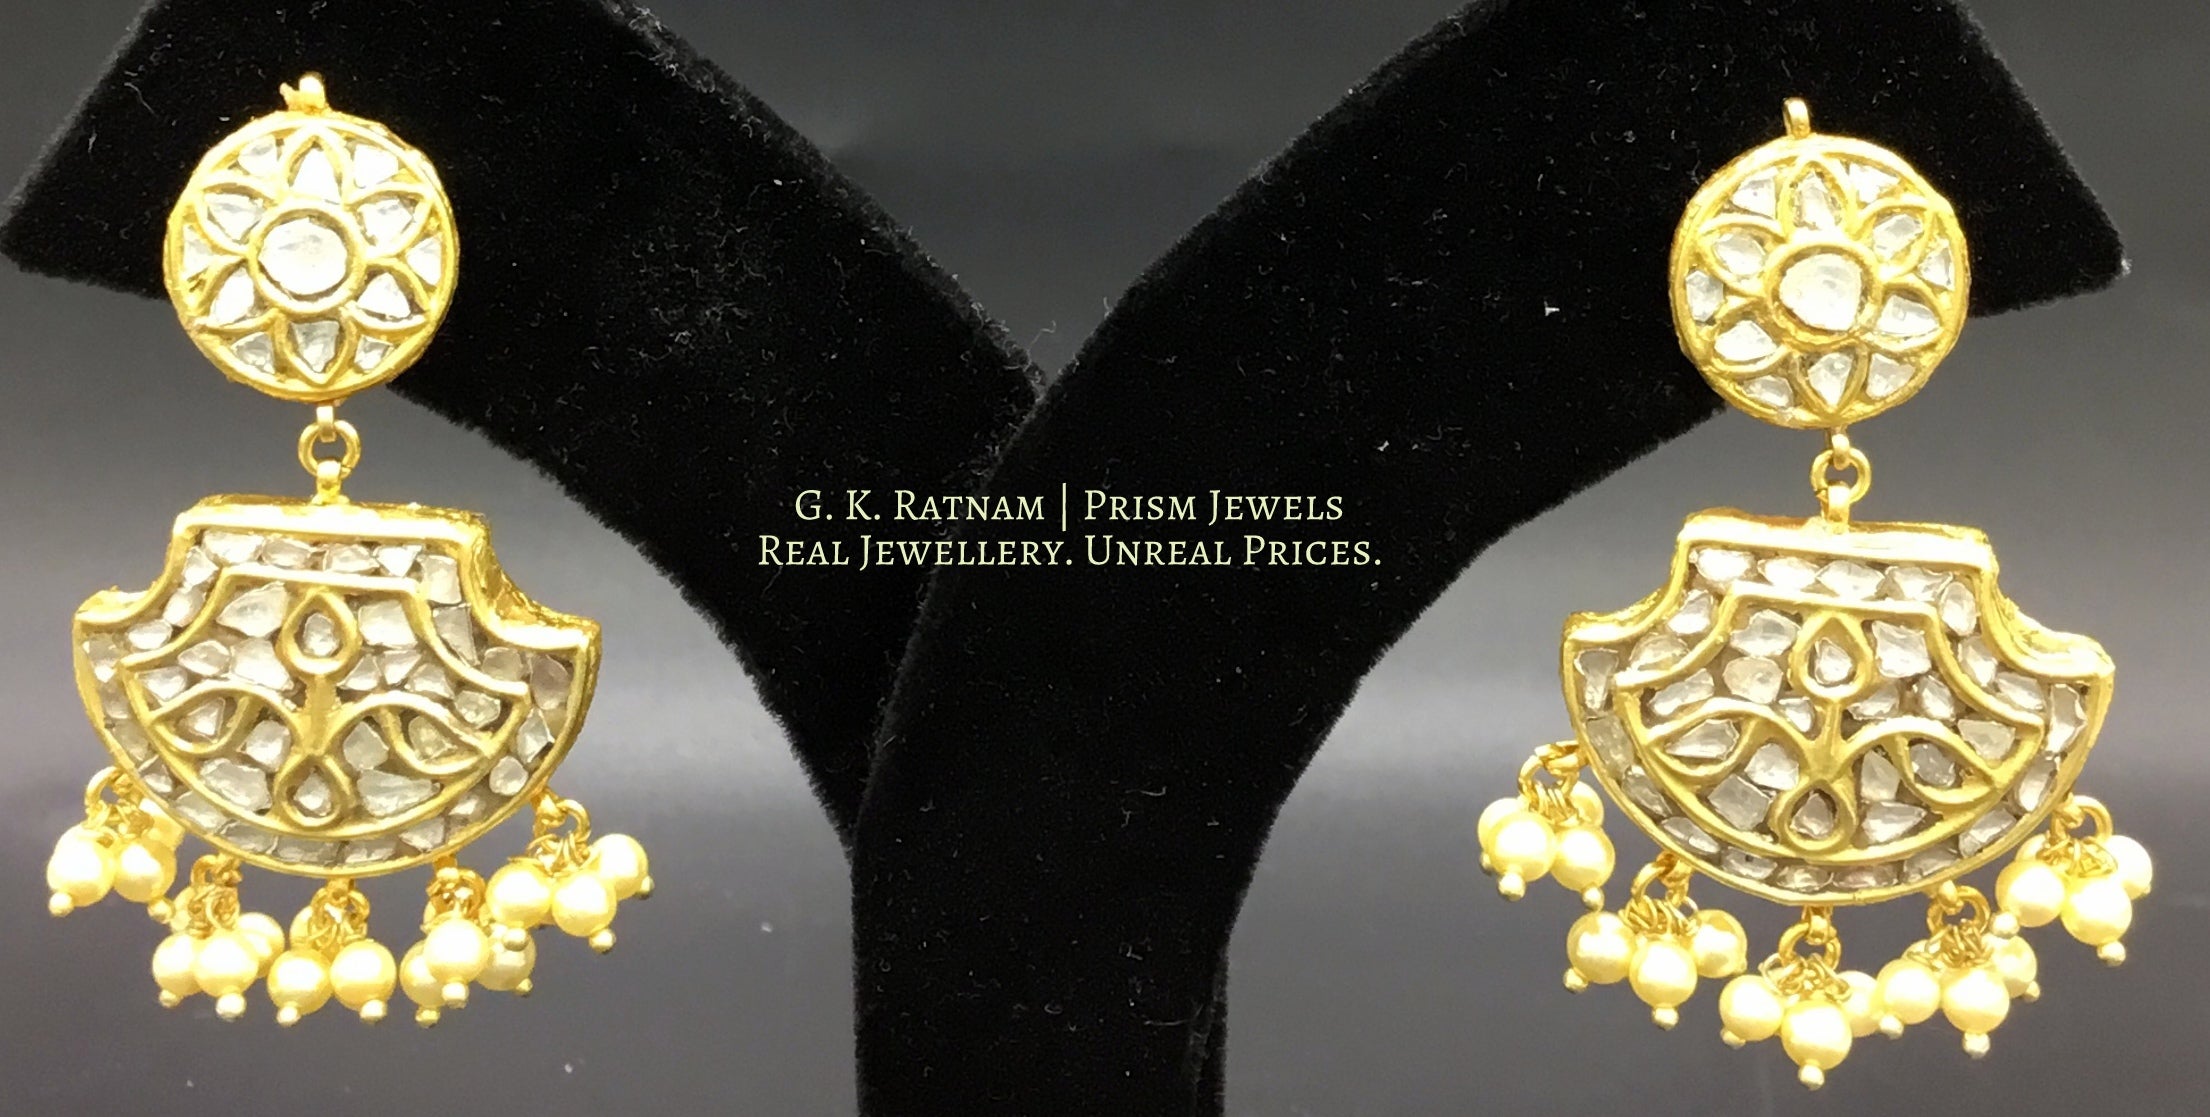 23k Gold and Diamond Polki two-step Long Earring Pair with pankhi (fan) shaped hanging - G. K. Ratnam